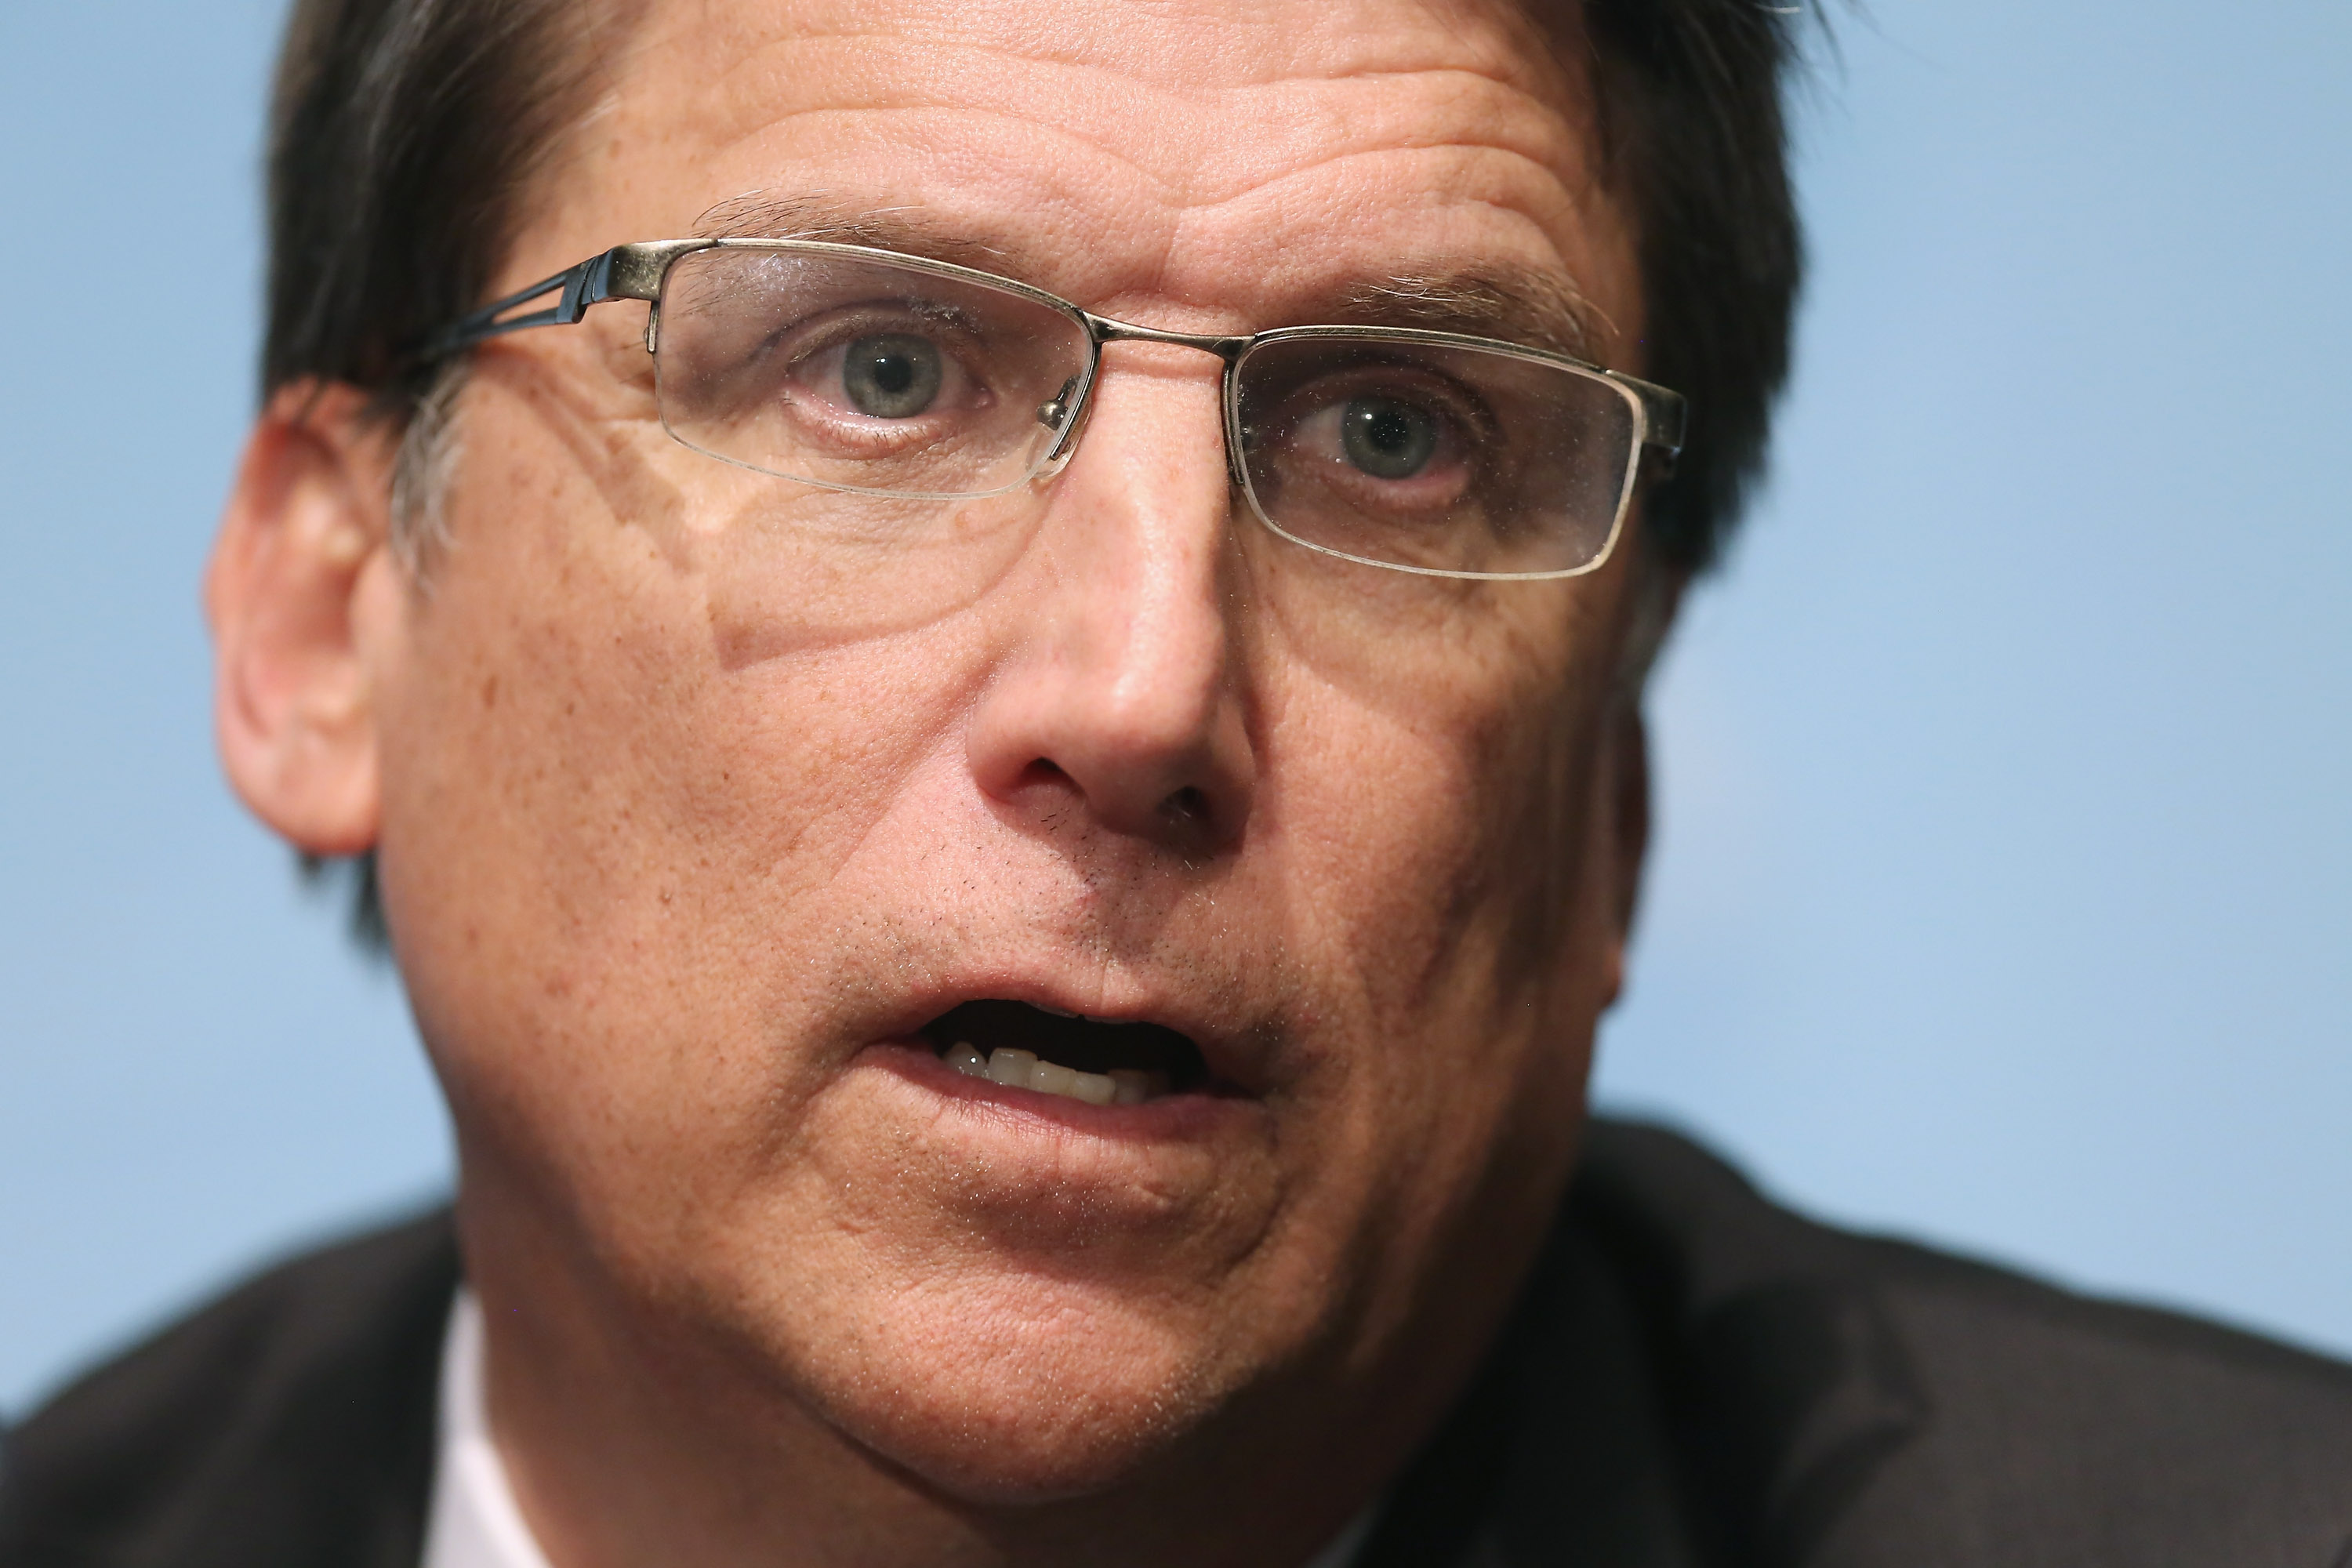 North Carolina Governor Pat McCrory holds a news conference with fellow members of the Republican Governors Association at the U.S. Chamber of Commerce  on Feb. 23, 2015 in Washington, DC. (Chip Somodevilla/Getty Images)